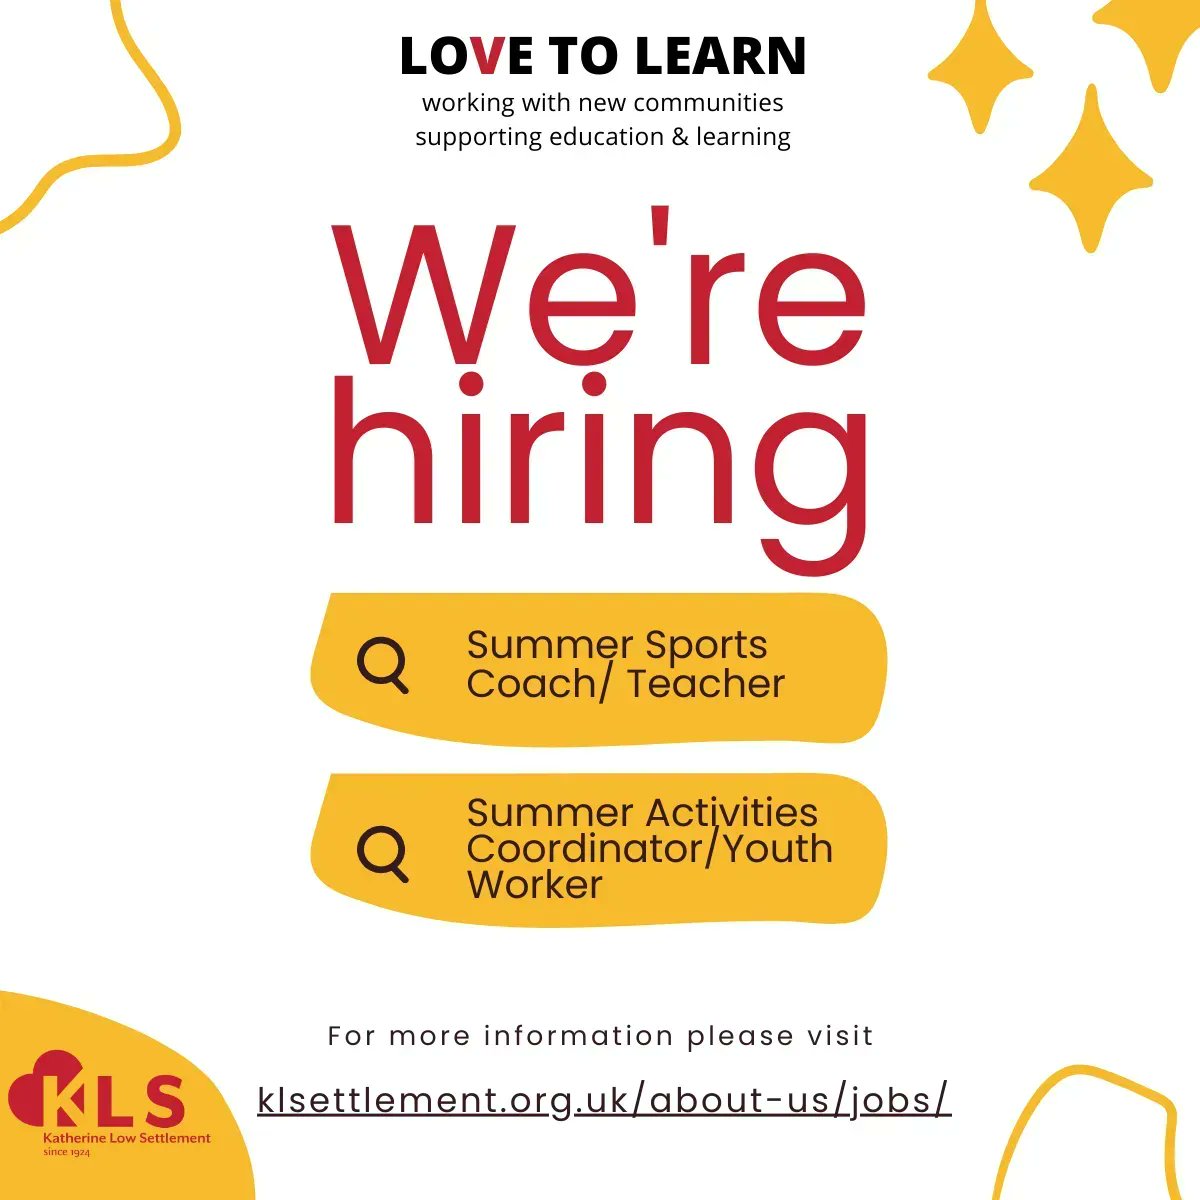 Looking for a job? Come join us supporting young people from a refugee background this summer! We’re hiring for the following positions:
For more information check out our website! klsettlement.org.uk/about-us/jobs/
#refugeesupport #youthworker #battersea #wandsworth #katherinelowsettlement